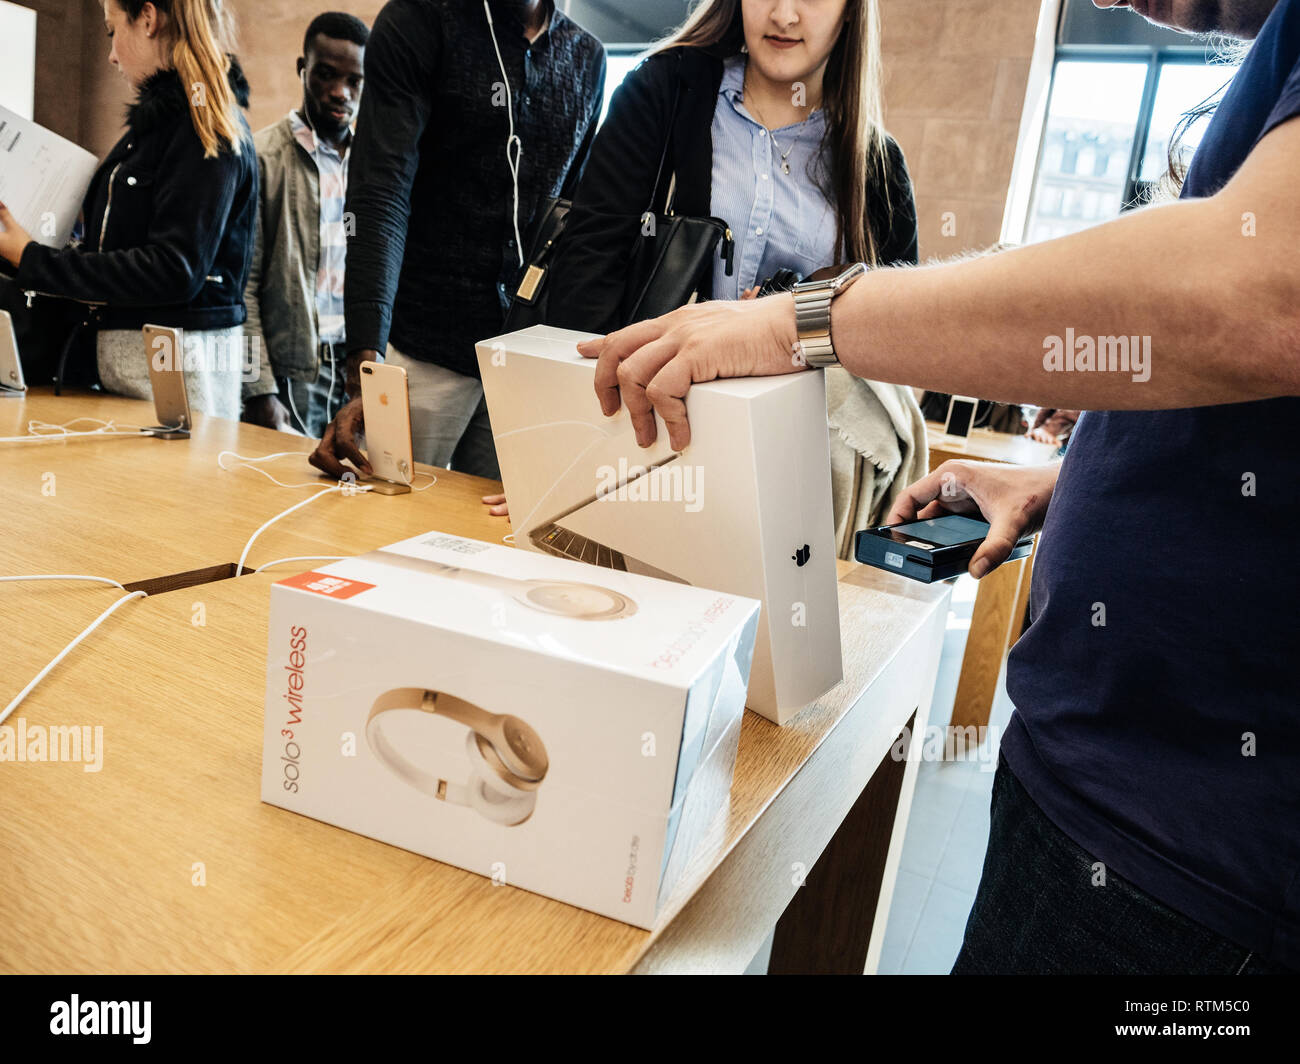 PARIS, FRANCE - SEP 22, 2017: New iPhone 8 and iPhone 8 Plus, as well the updated Apple Watch, Apple TV goes on sale today in Apple Store with young customer student buying Macbook Pro with Beats by dr dre, headphones Stock Photo